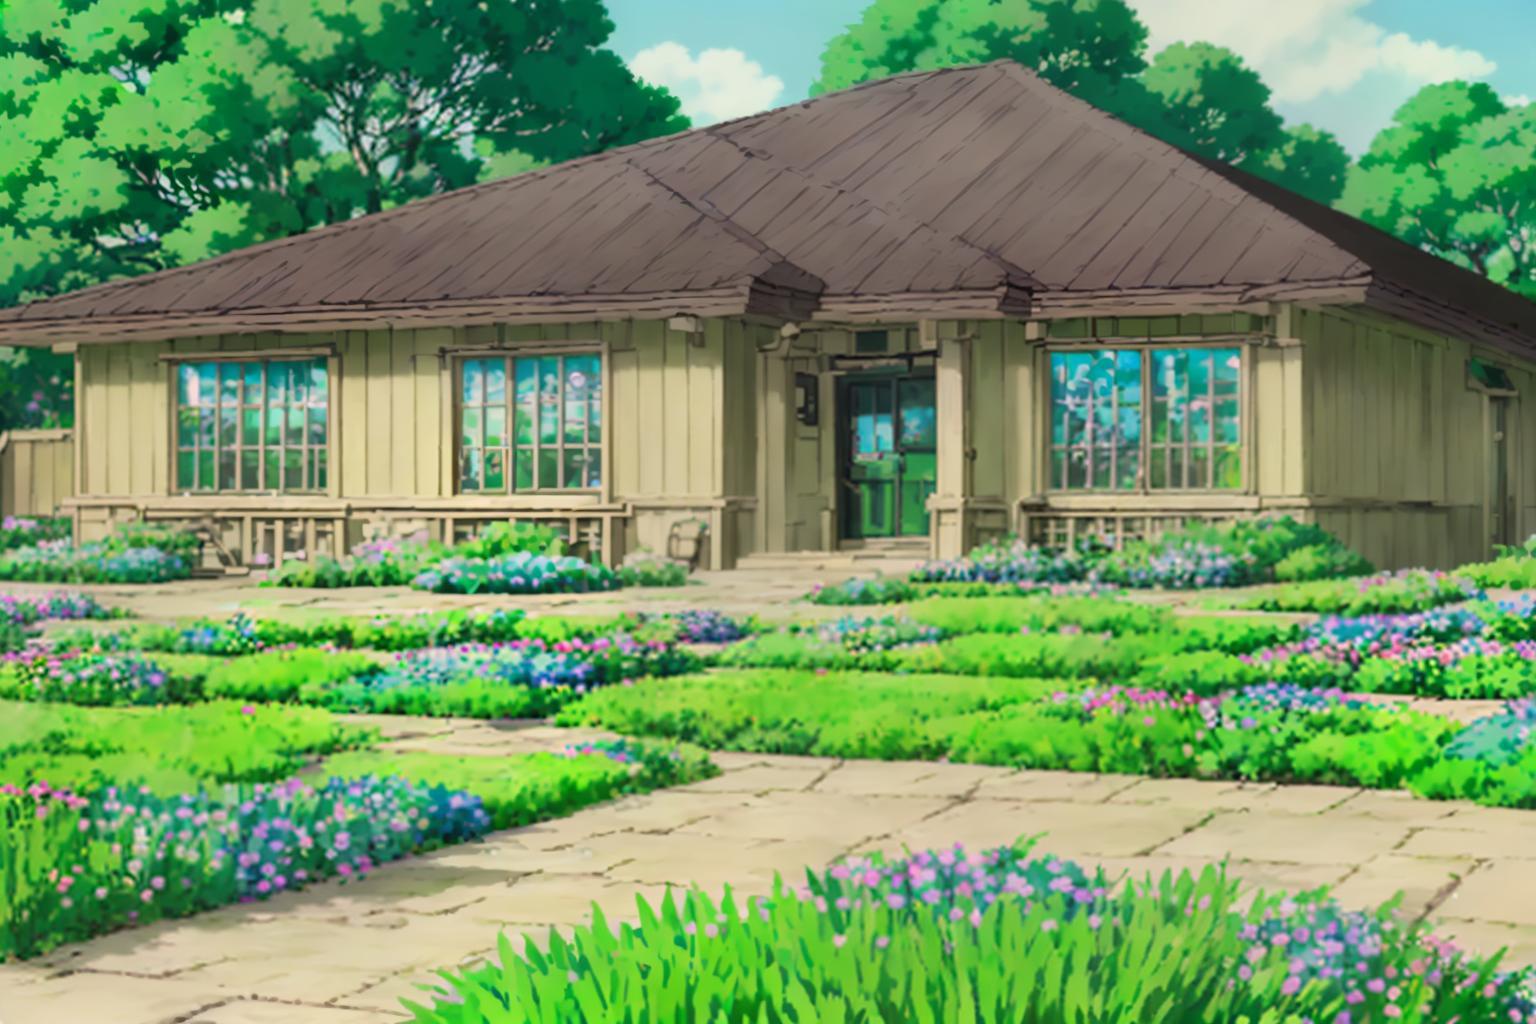 ai generated Studio Ghibli artwork depicting a charming cottage with a thatched roof surrounded by a lush flower garden with a variety of vibrant blooms and a stone pathway leading to the welcoming front door, set against a backdrop of green trees under a clear sky.